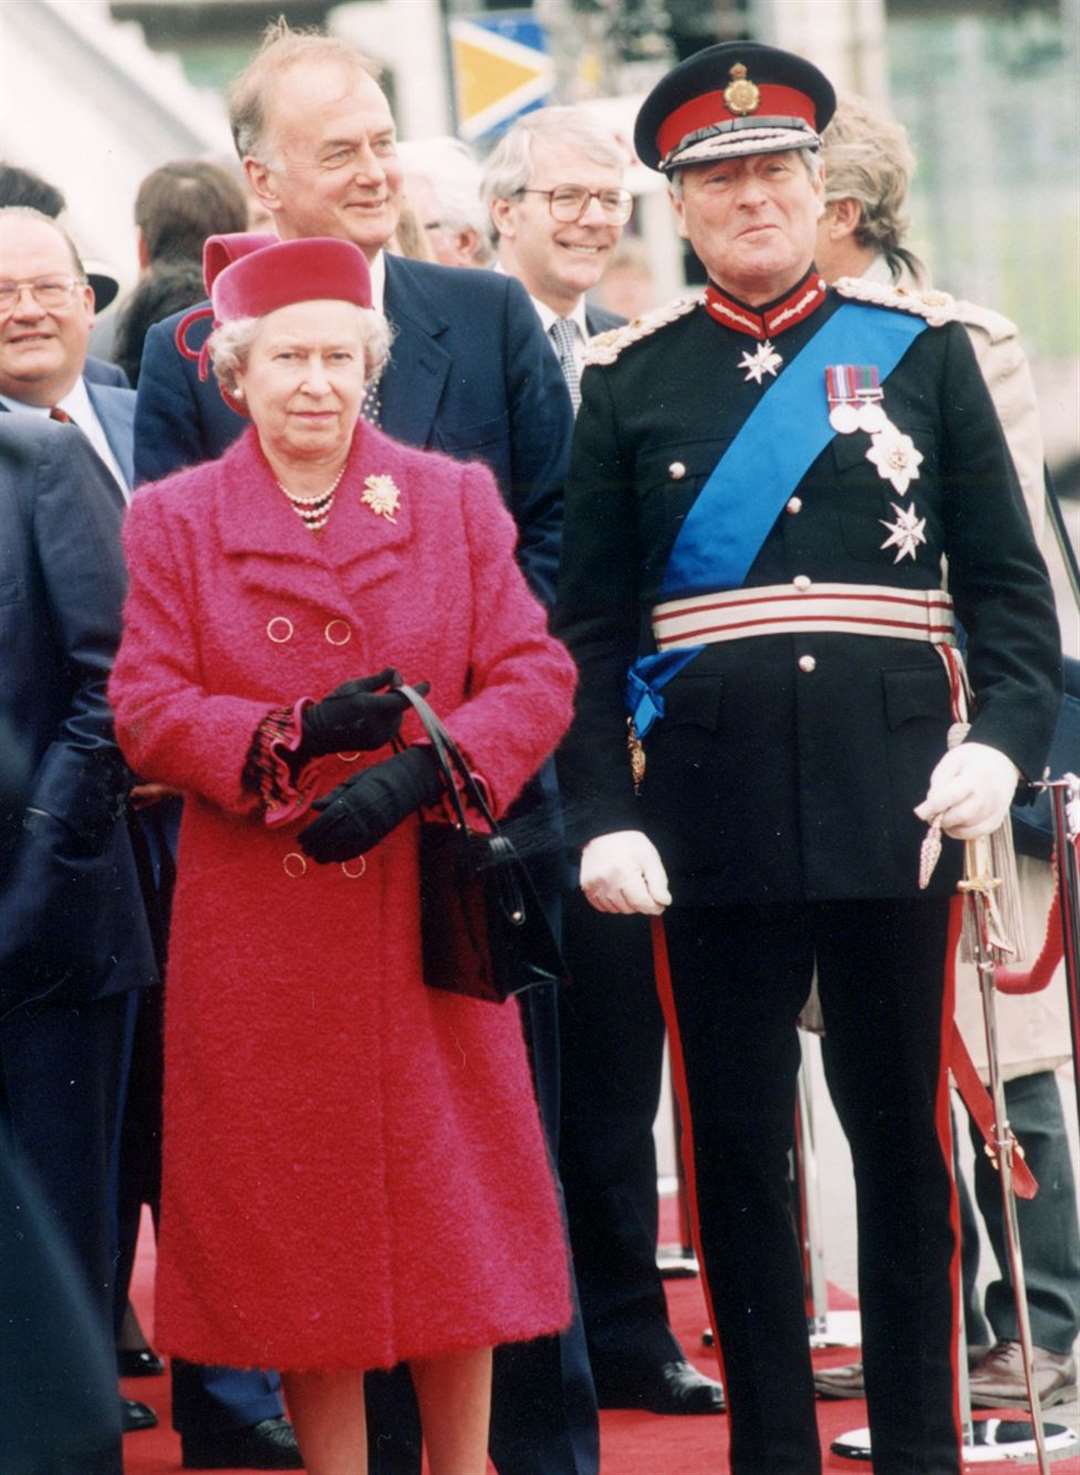 The Queen and then Lord Lieutenant of Kent, Robin Leigh-Pemberton, a the official opening of the Channel Tunnel in May 1994 - then-PM John Major can be seen in the background